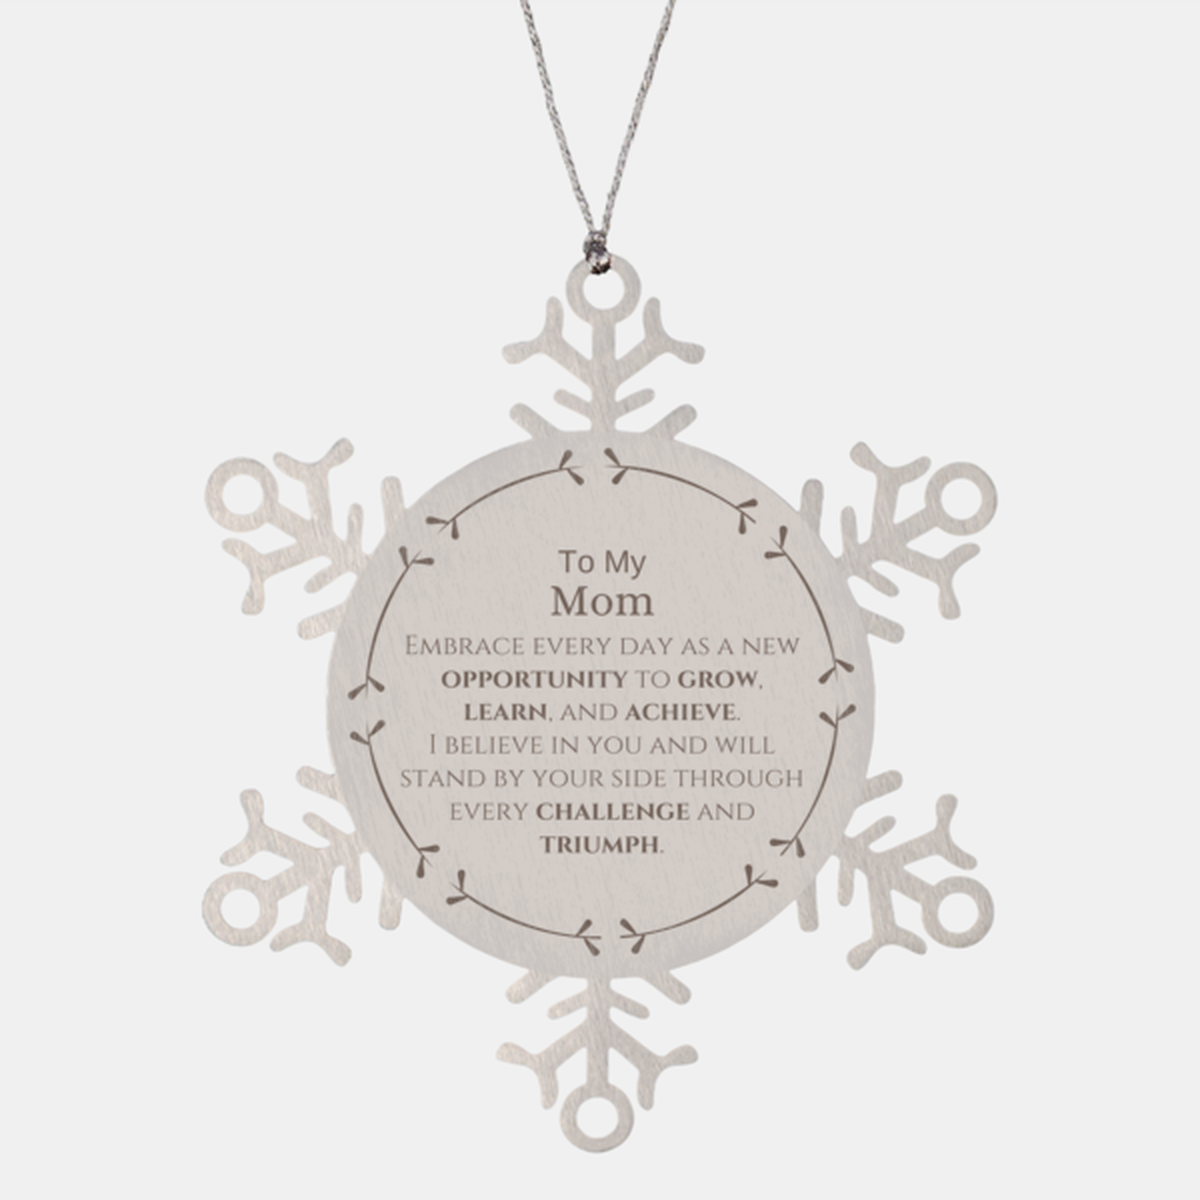 To My Mom Gifts, I believe in you and will stand by your side, Inspirational Snowflake Ornament For Mom, Birthday Christmas Motivational Mom Gifts